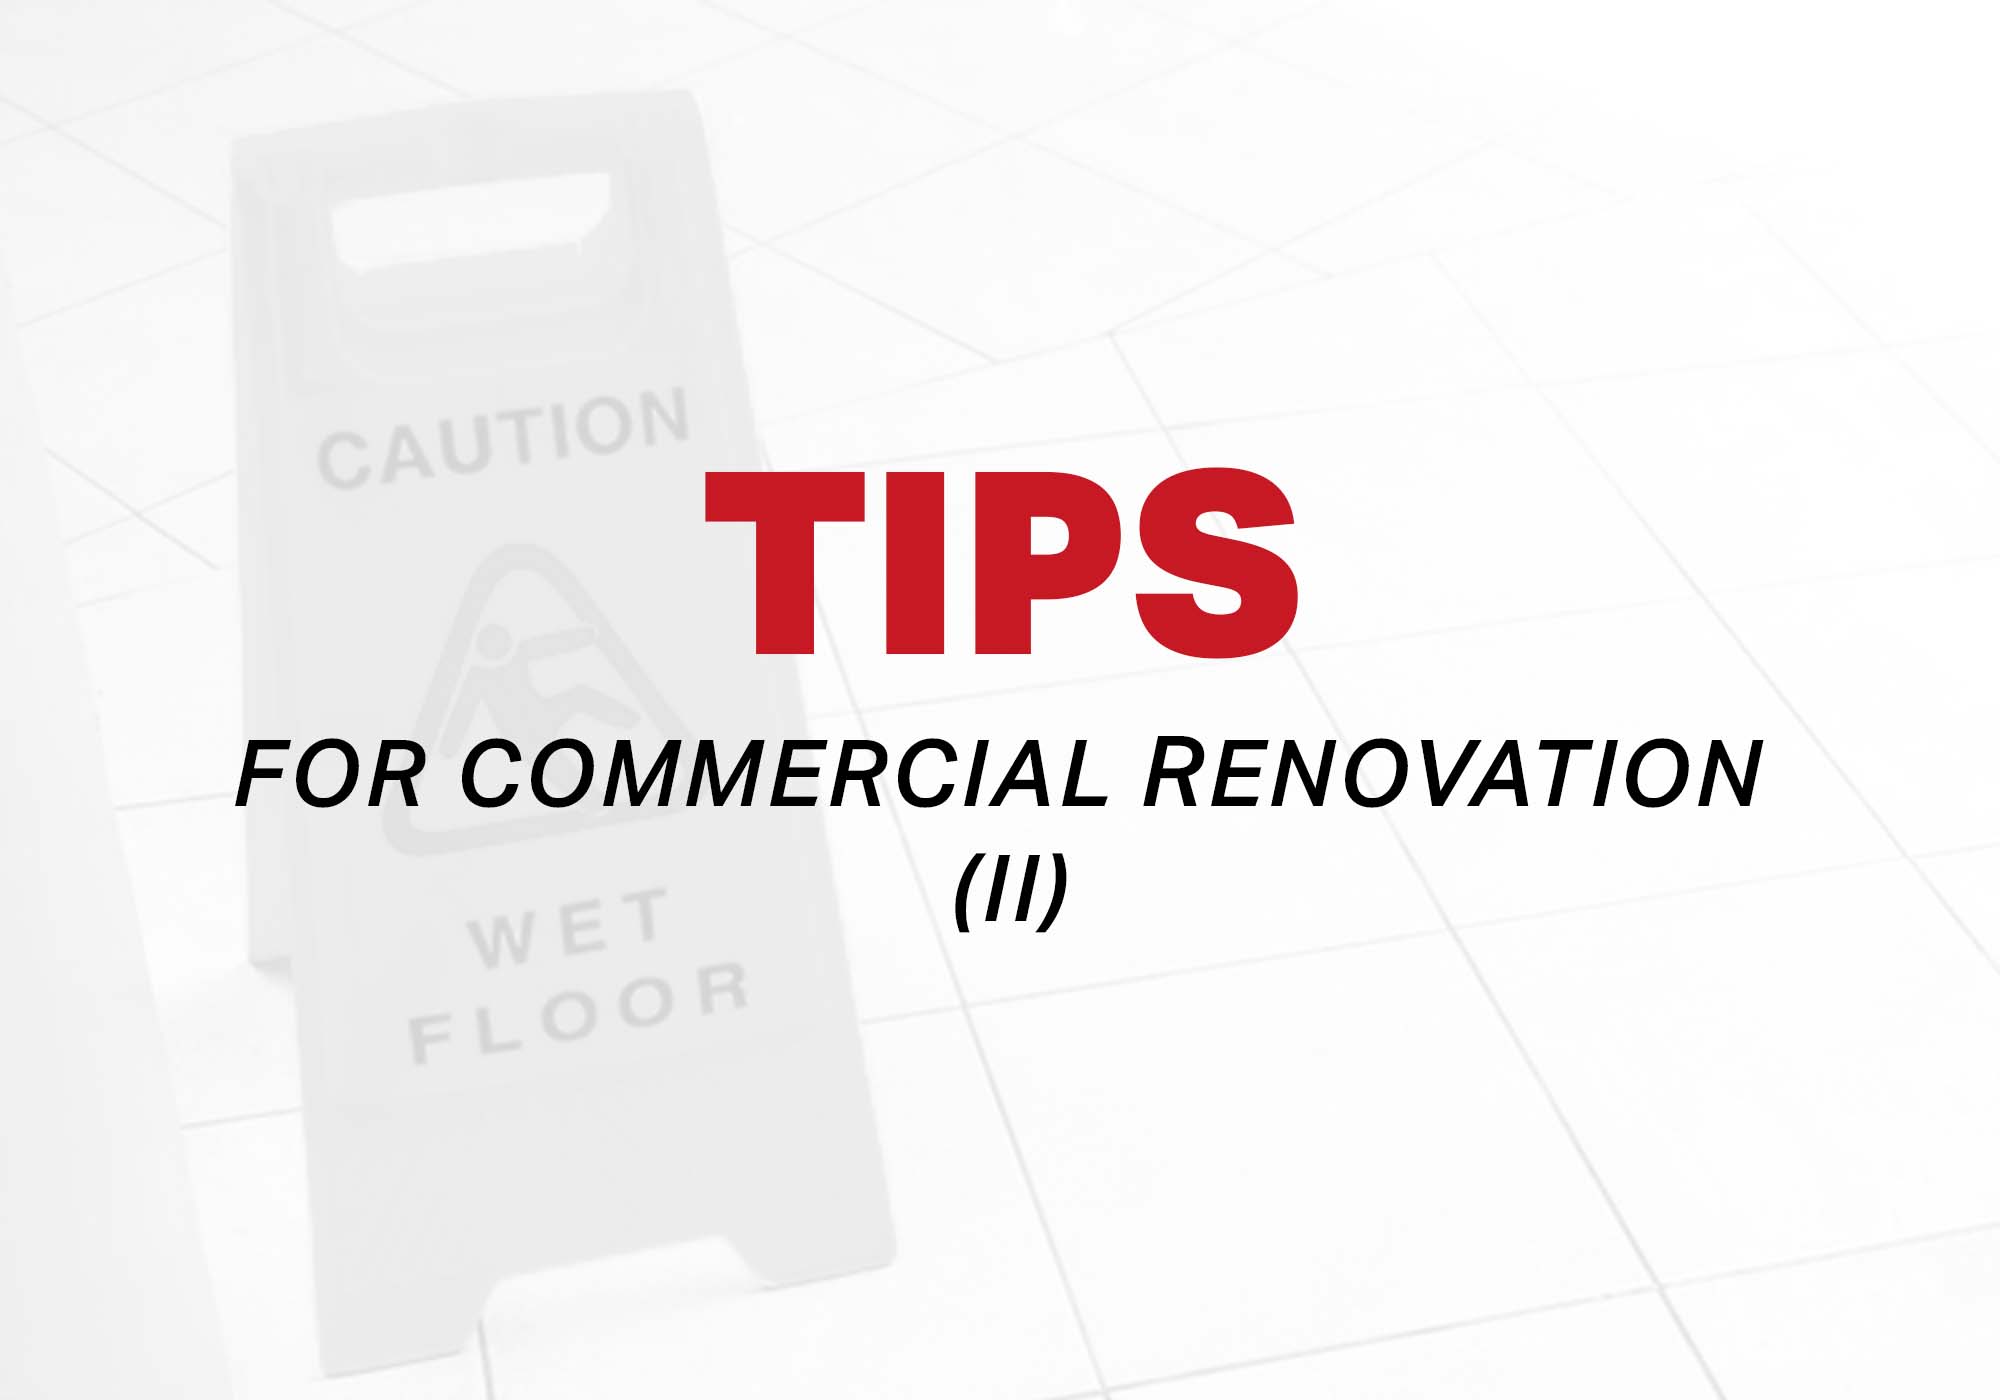 Try Avoiding These for Your Next Commercial Renovation (II)